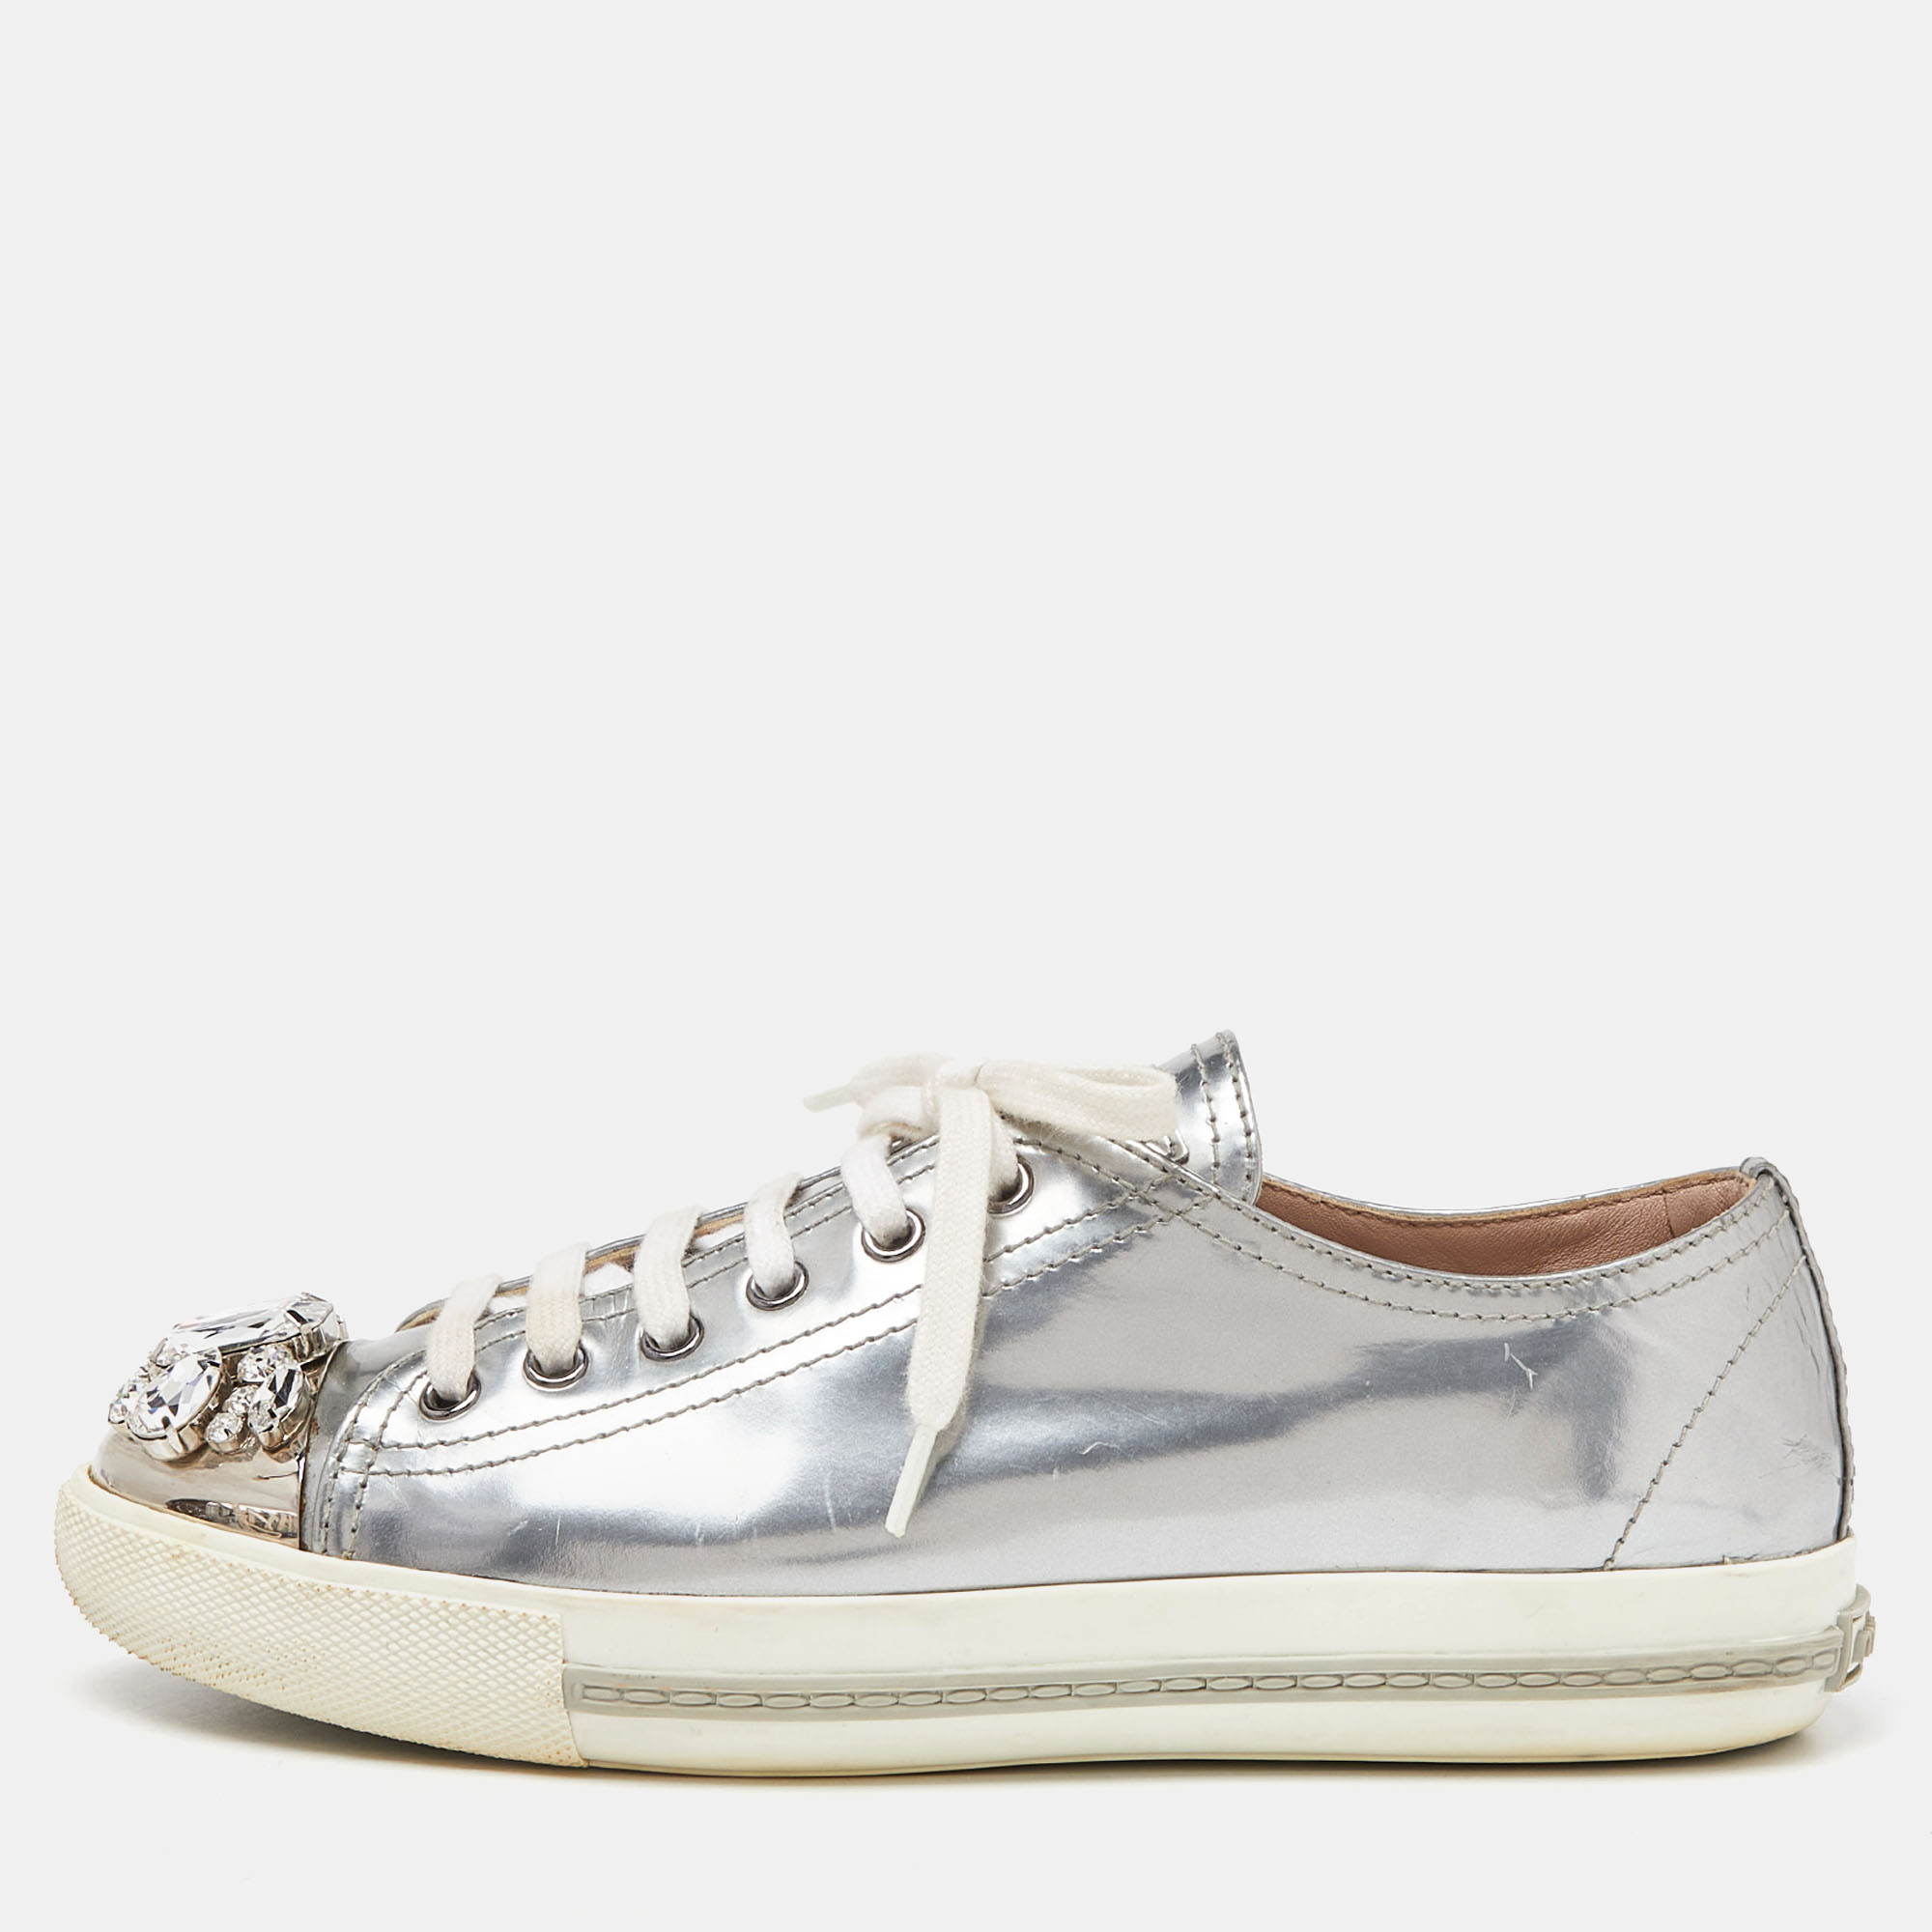 Pre-owned Miu Miu Silver Patent Leather Crystal Embellished Cap-toe Low-top Trainers Size 38.5